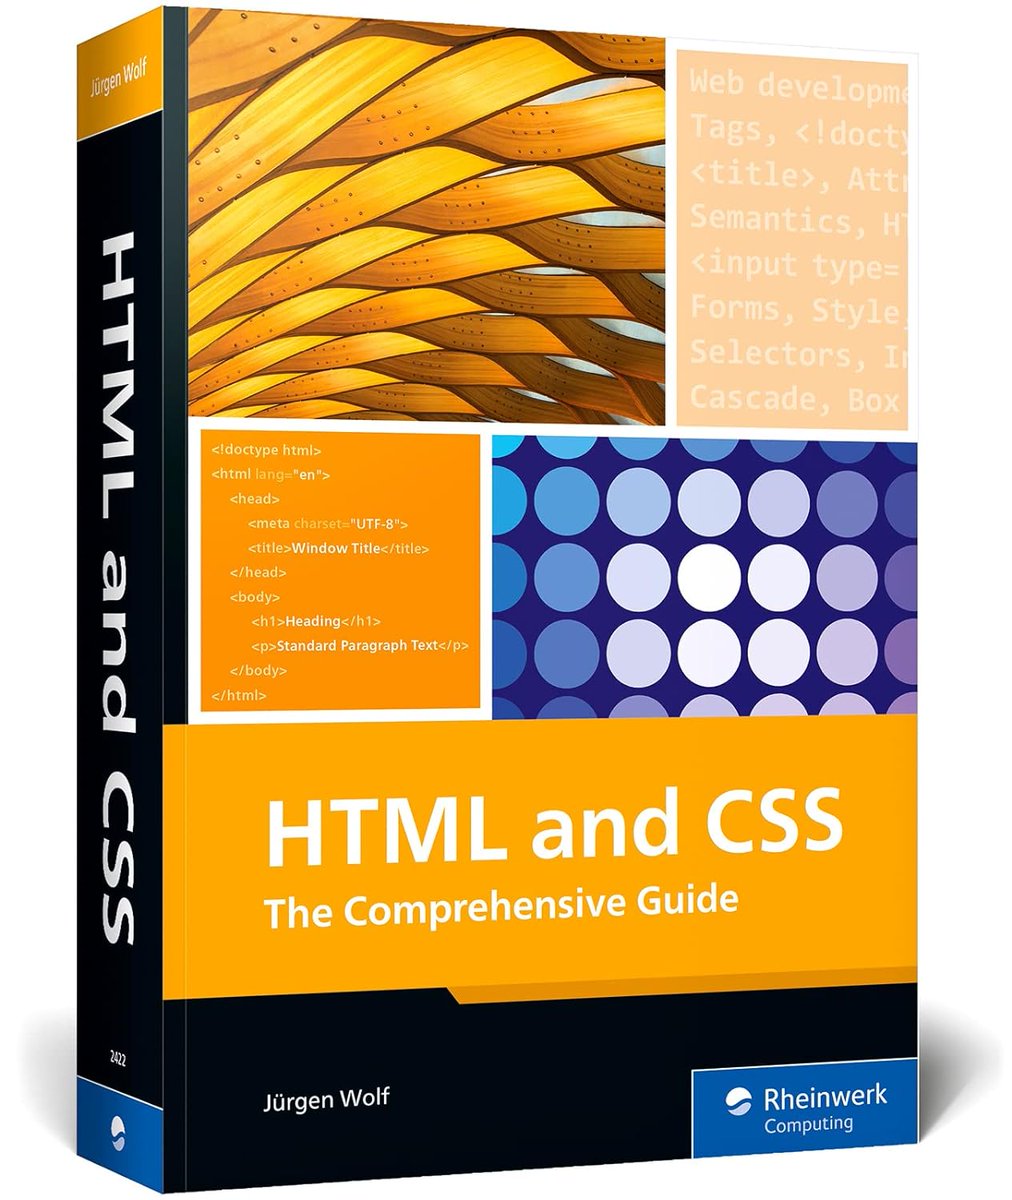 HTML and CSS: The Comprehensive Guide amzn.to/3xC0So6

#css #css3 #programming #developer #programmer #coding #coder #softwaredeveloper #computerscience